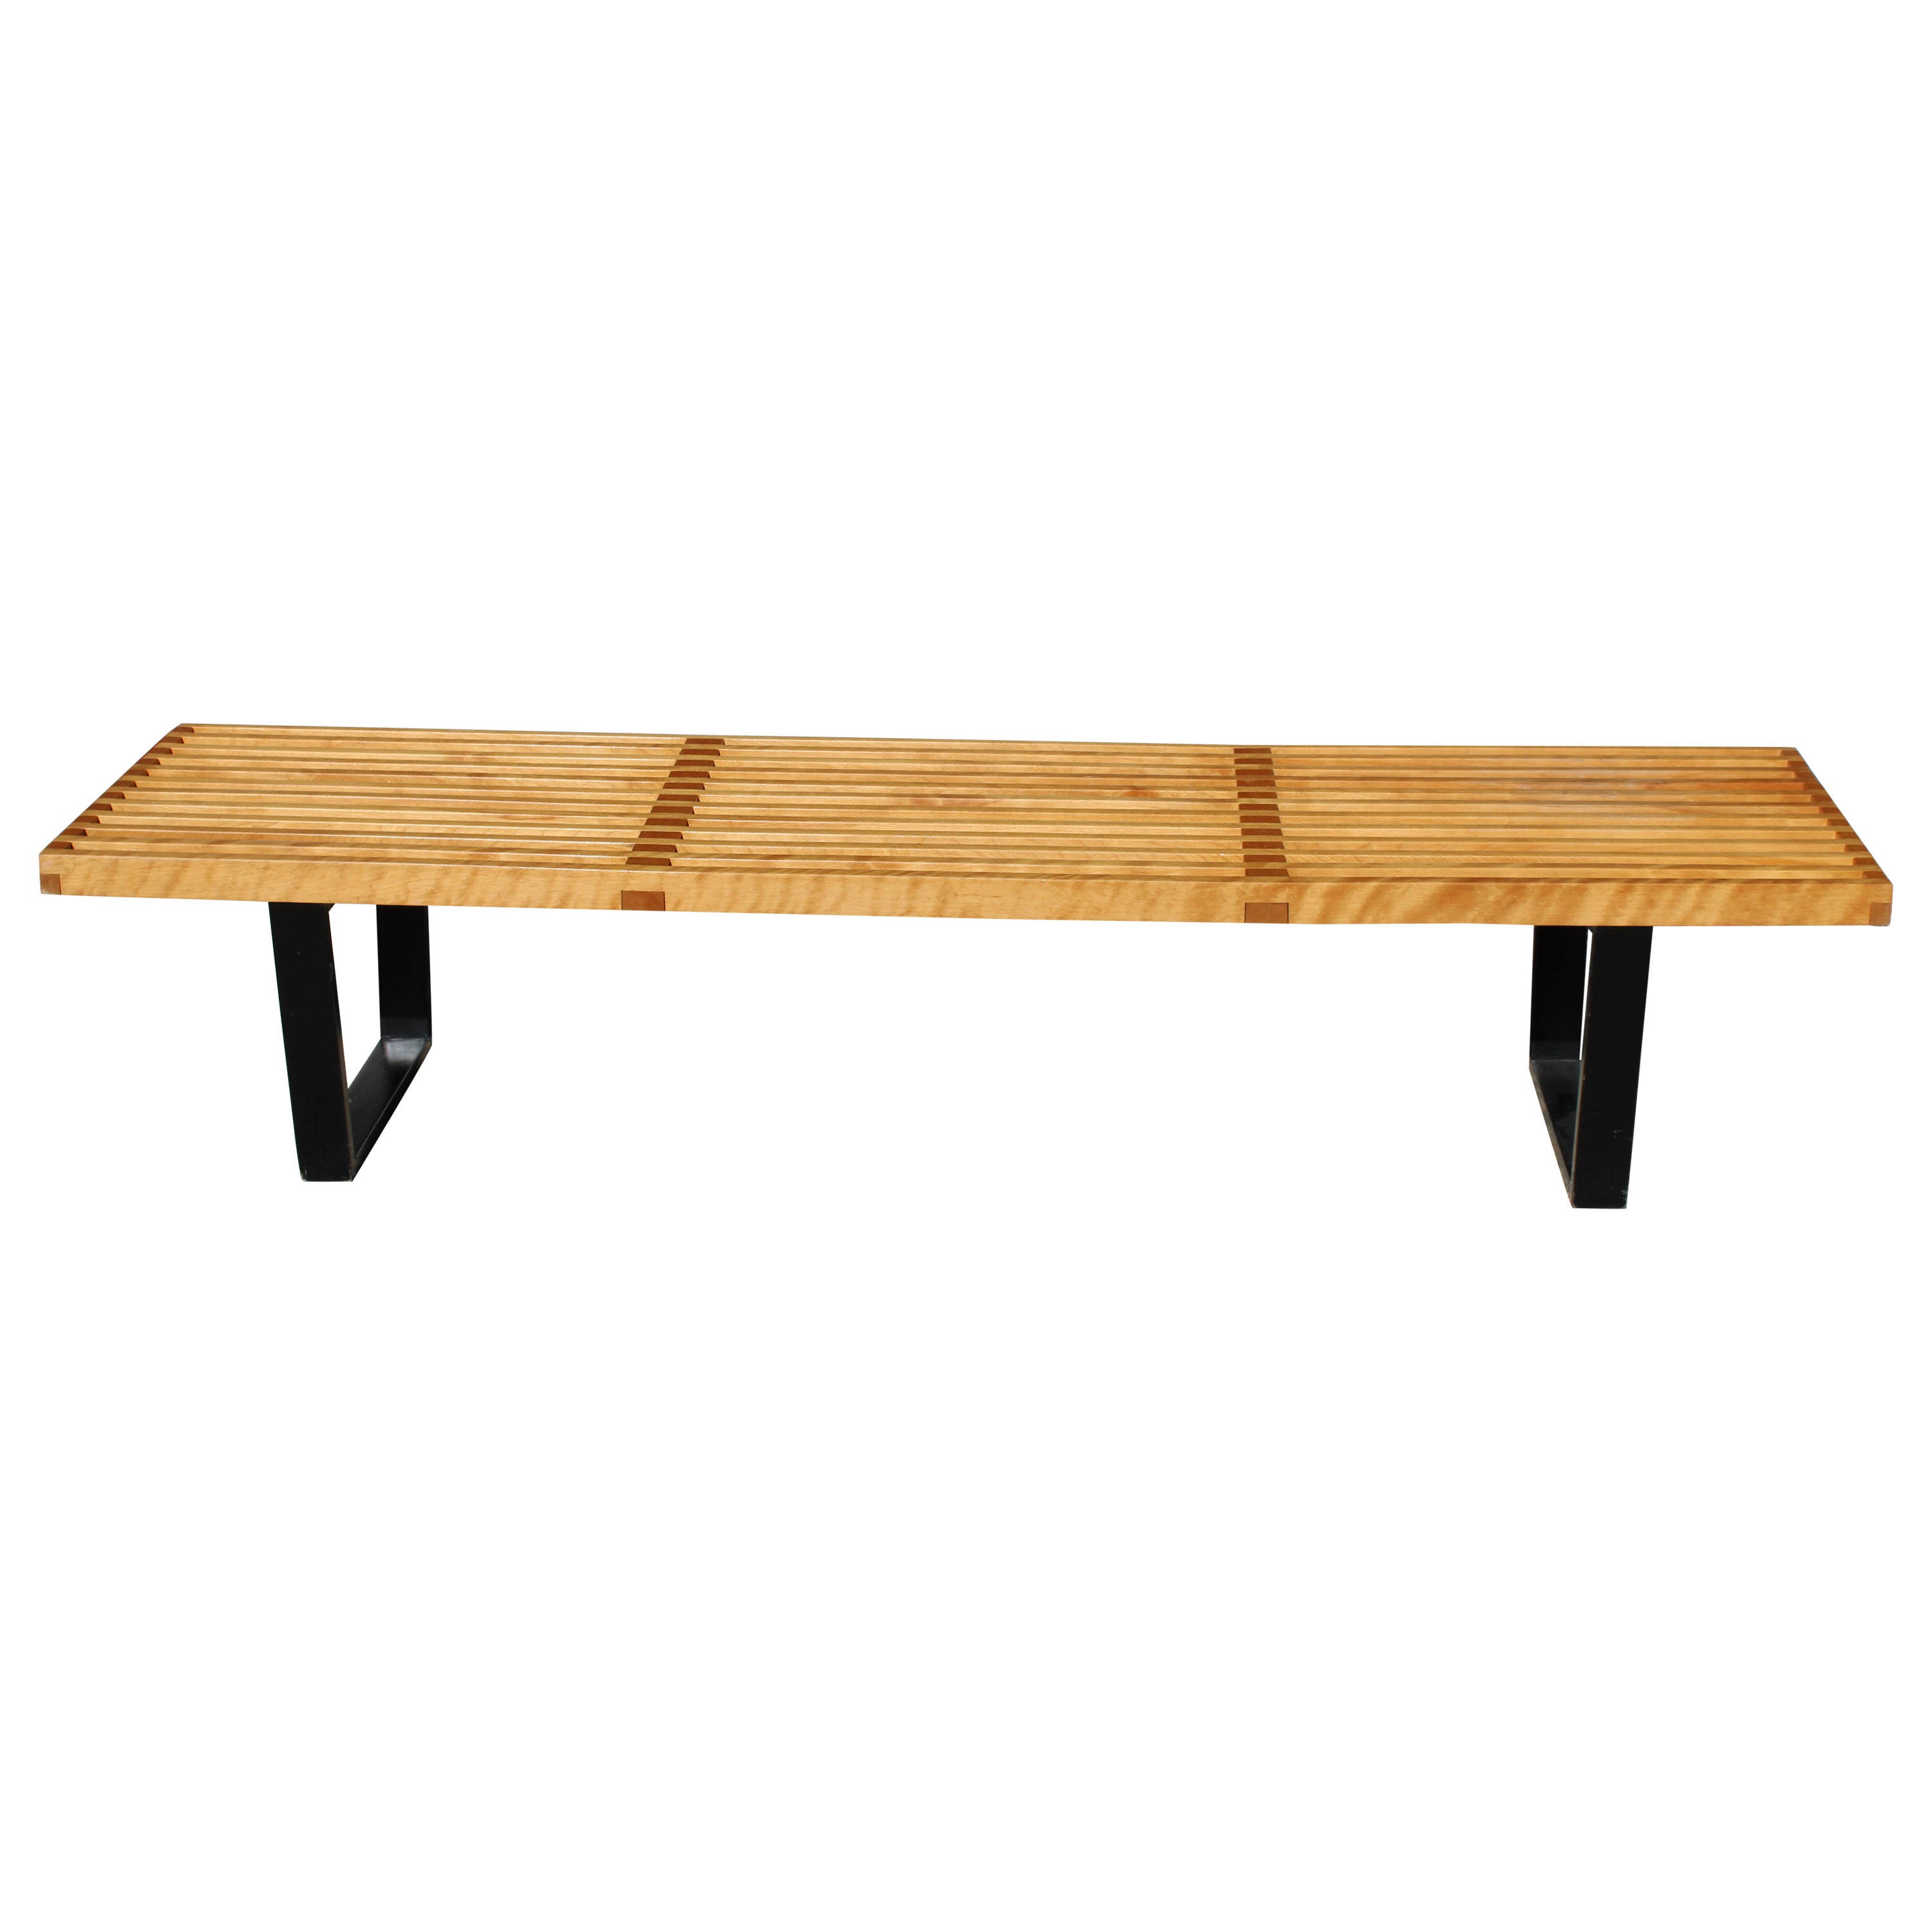 George Nelson Platform Bench For Sale